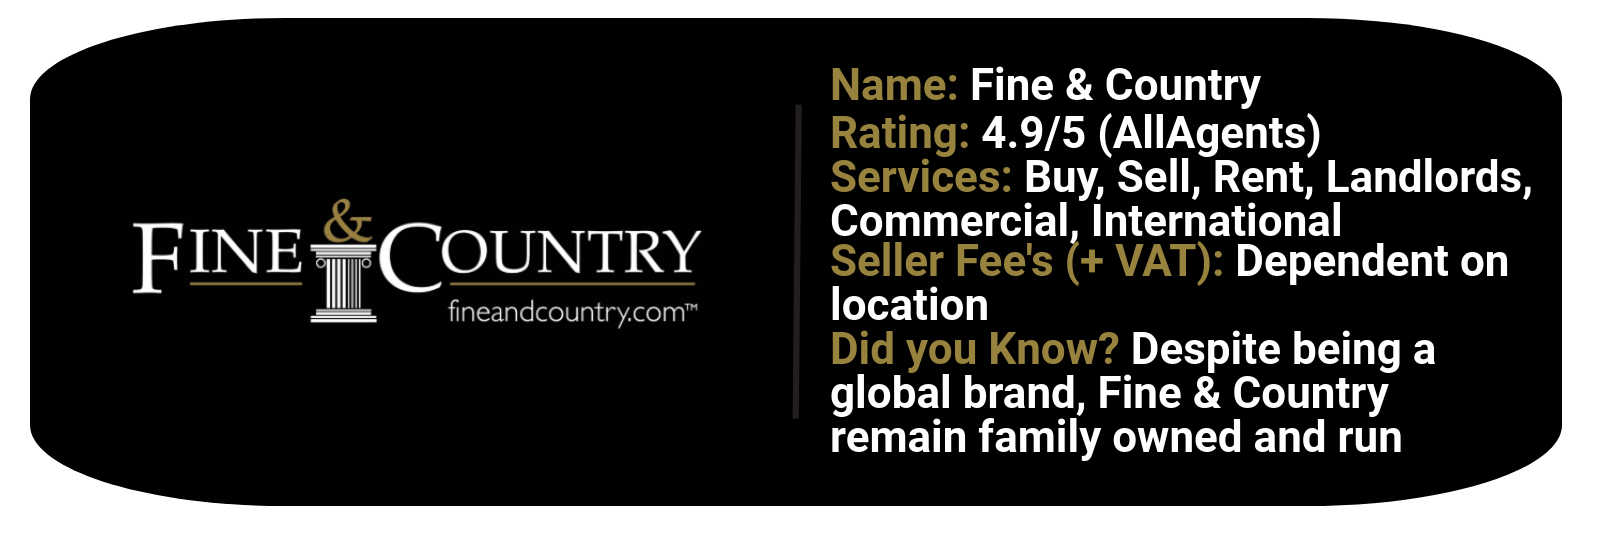 fine and country_statistics featuring rating, services & seller fee's